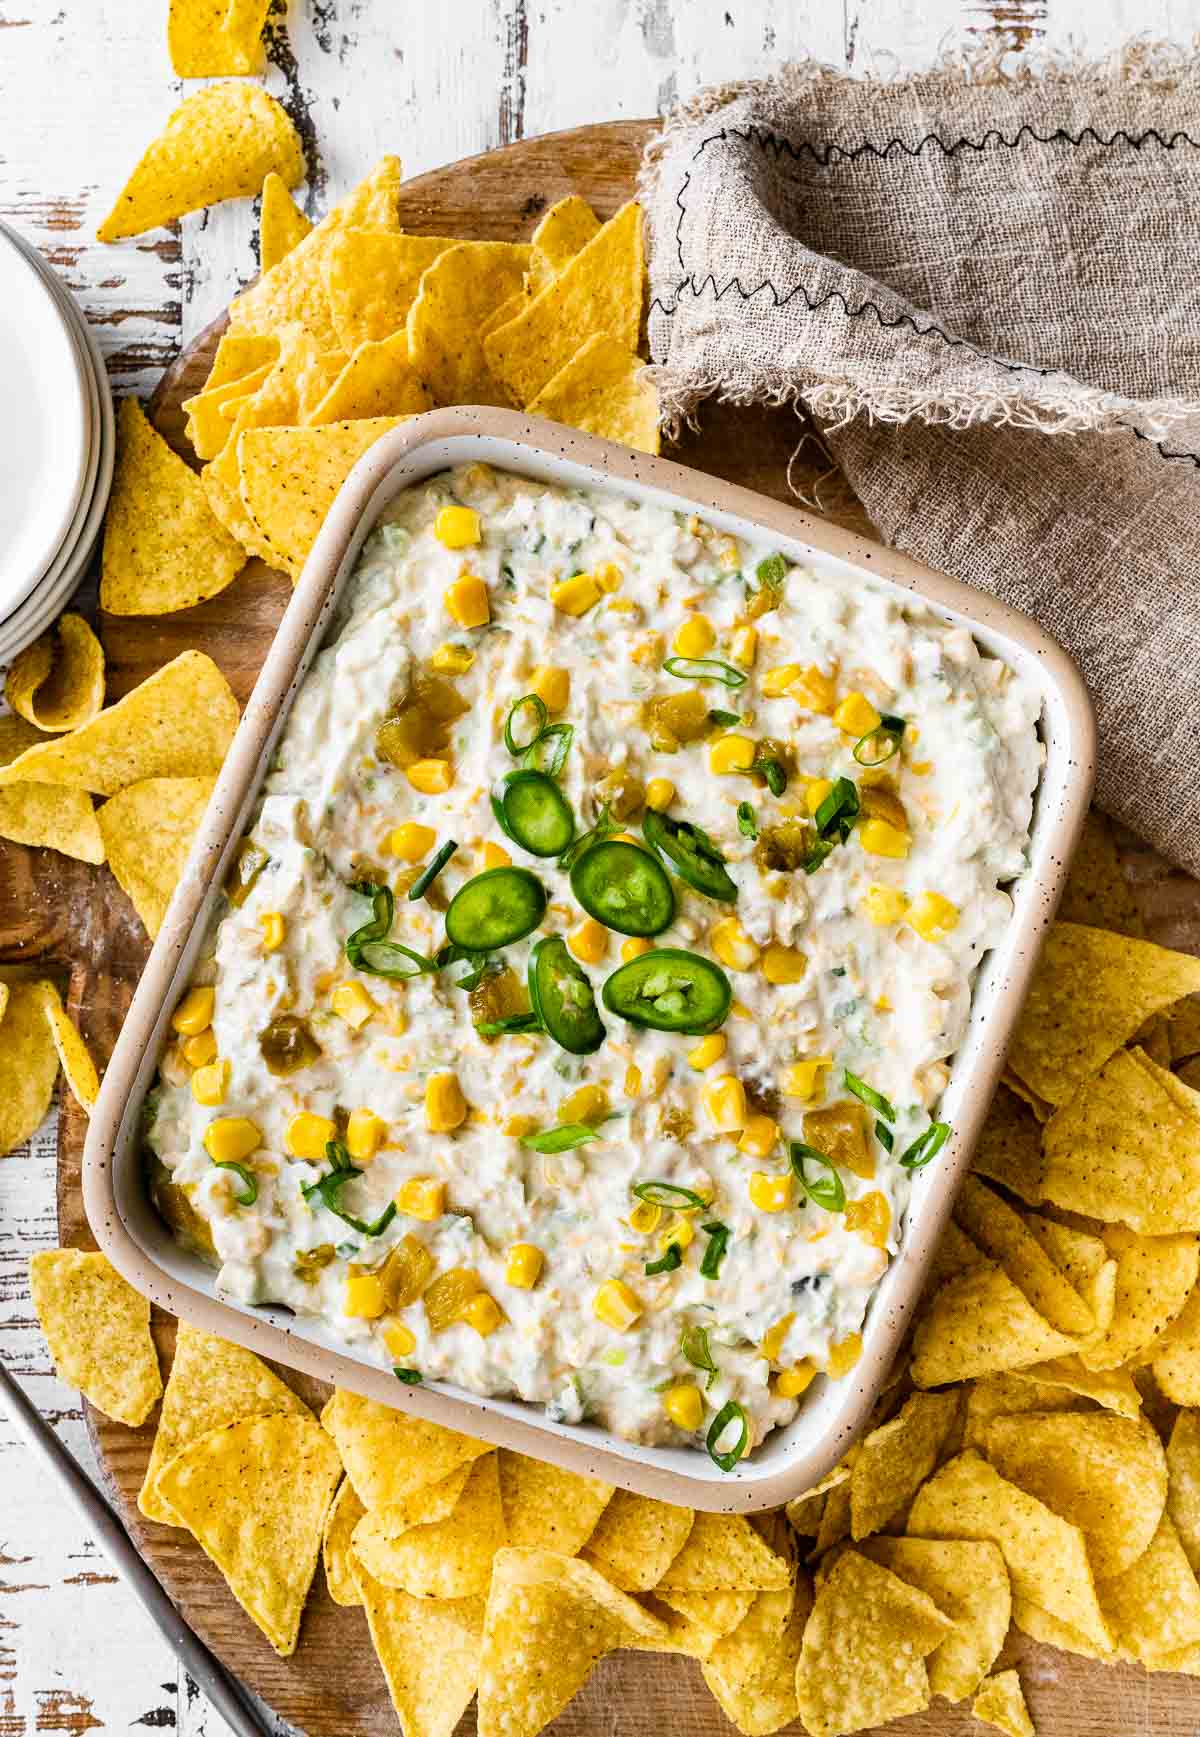 Corn Dip finished dip in serving dish garnished with sliced jalapeno and surrounded by corn tortilla chips